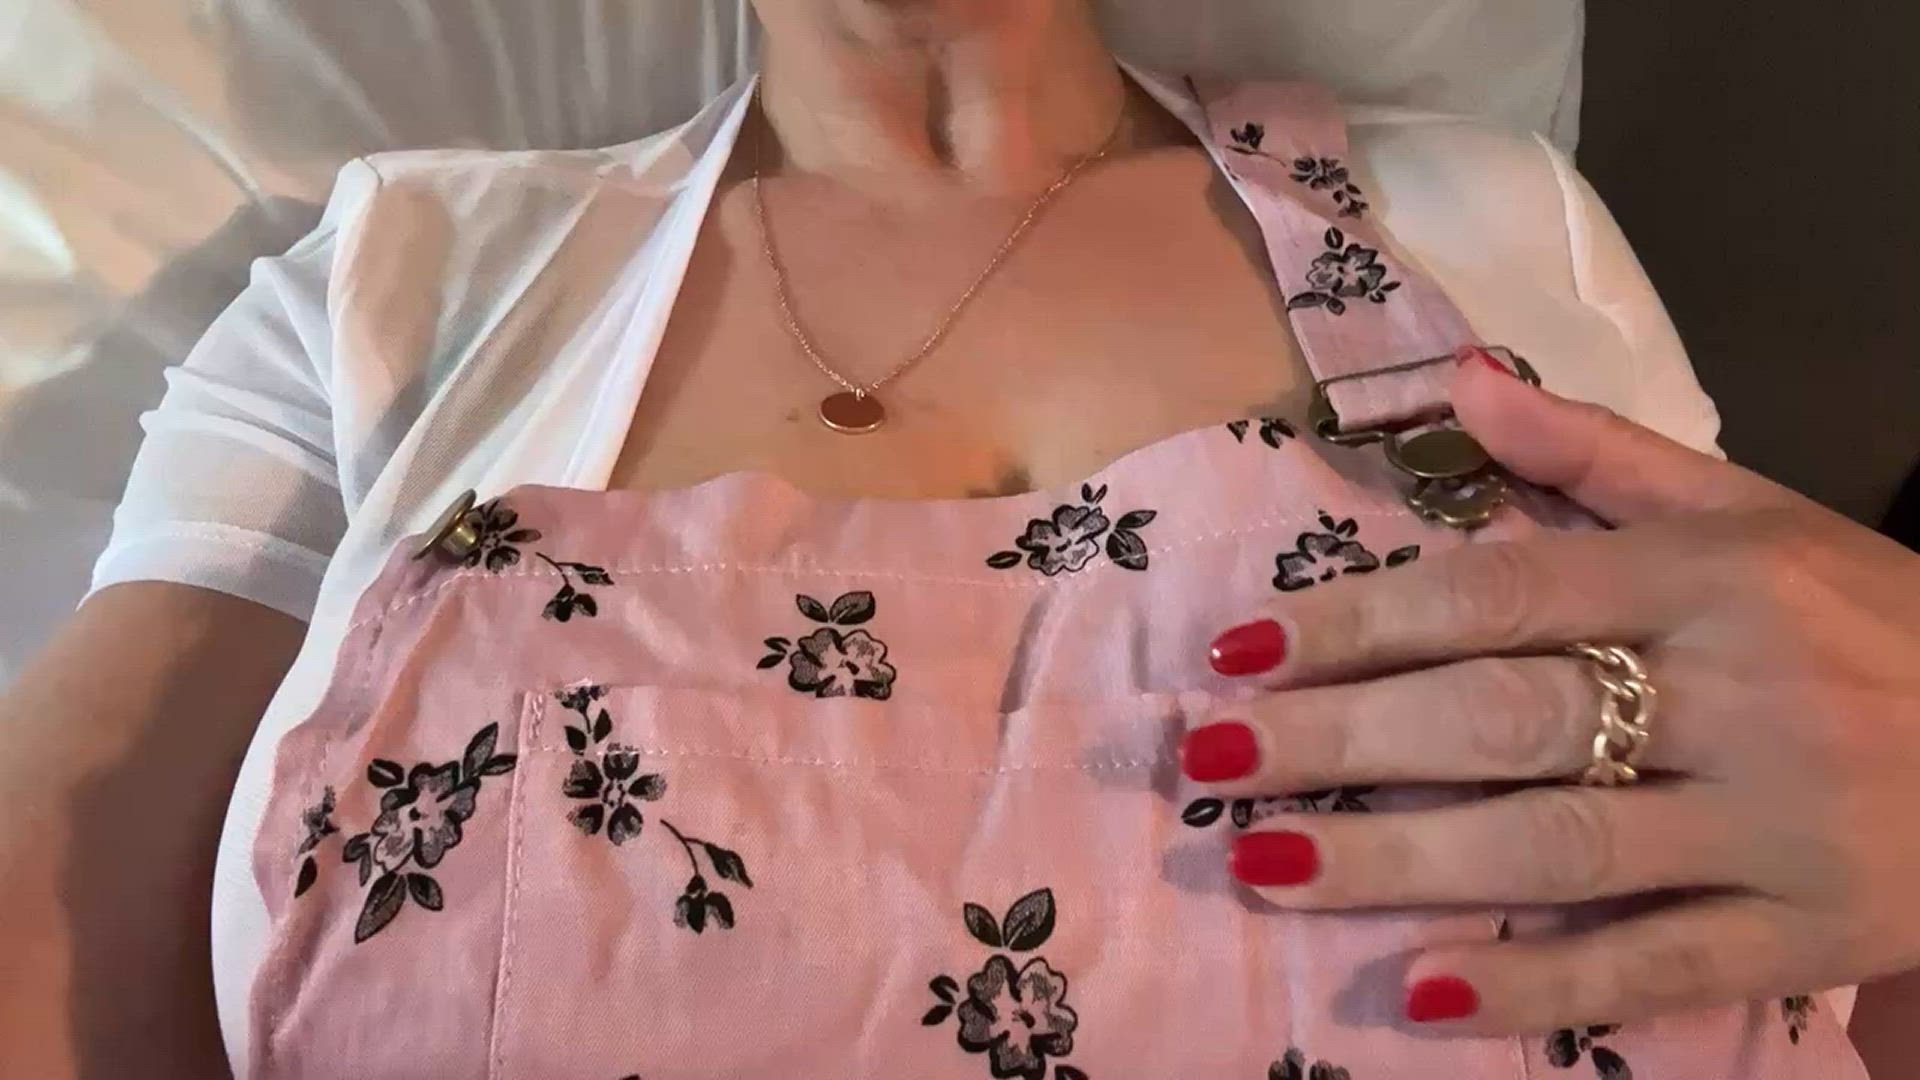 Big Tits porn video with onlyfans model Hannah28h <strong>@hannah28h</strong>